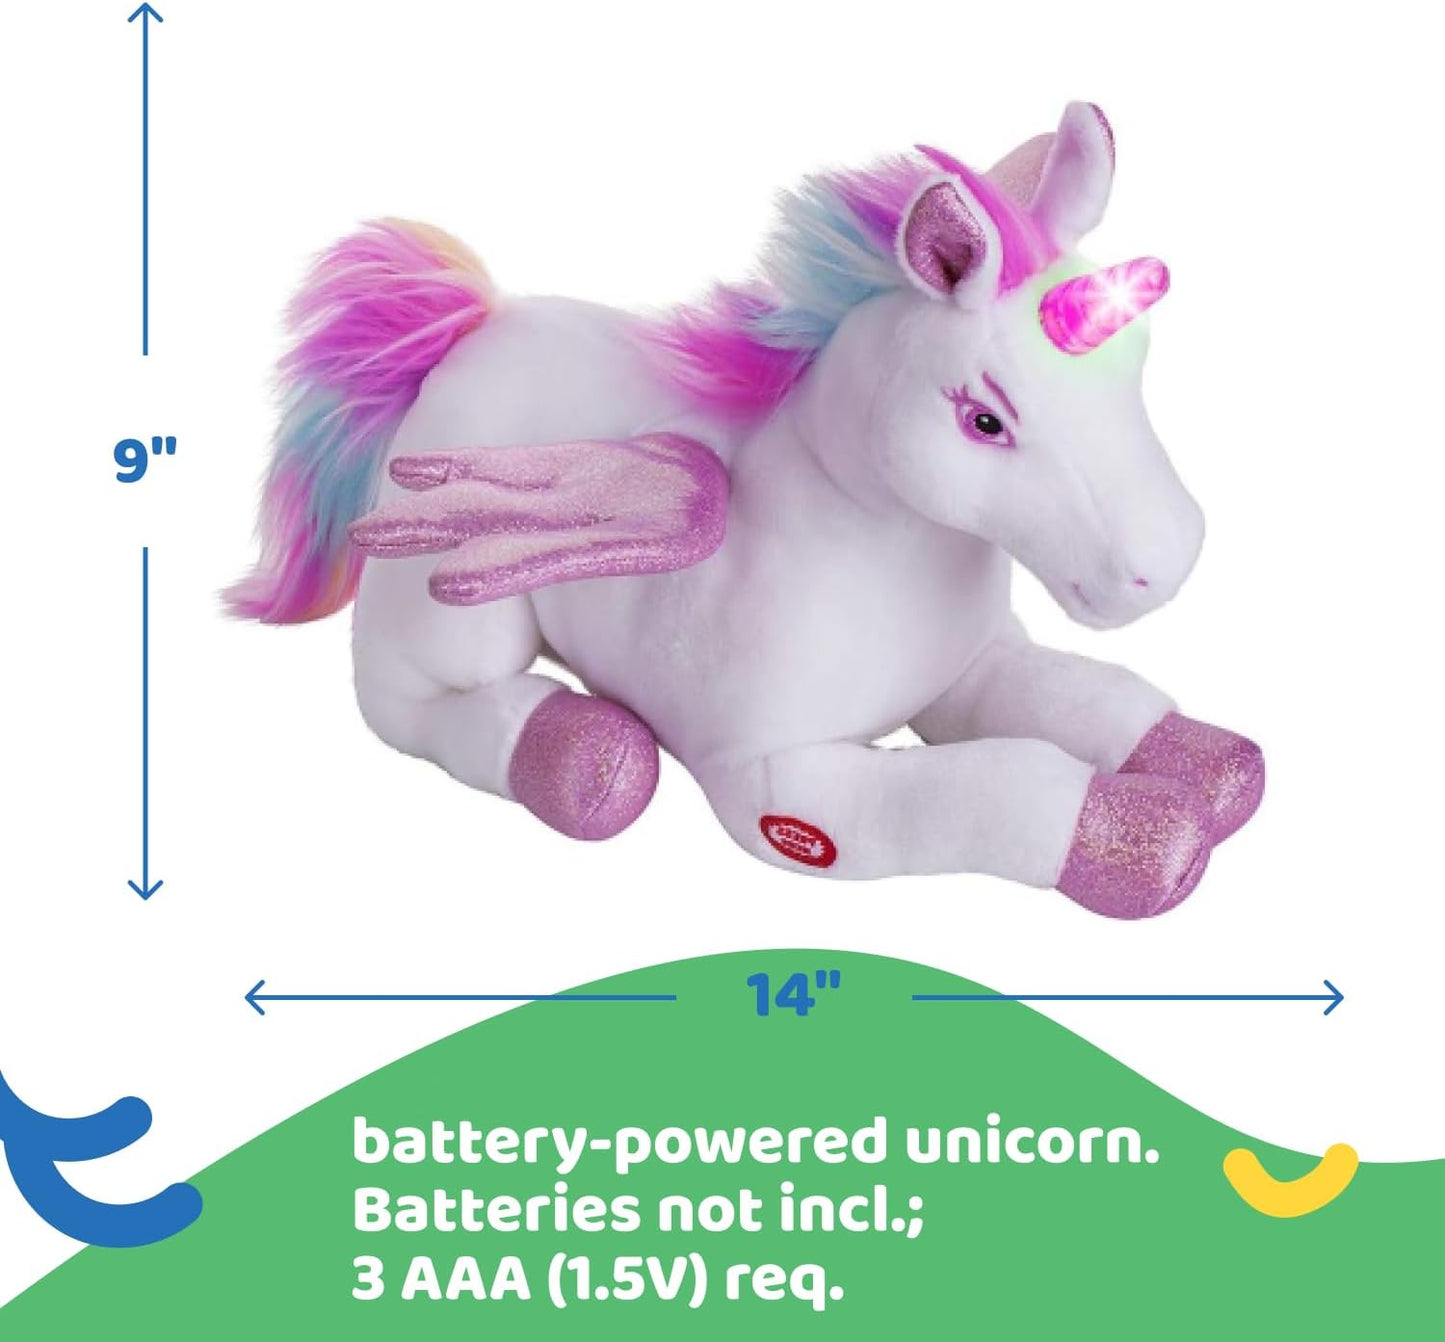 Unicorn Stuffed Animal with Flapping Wings - Musical Plush Unicorn Toy with Magical Lights and Sounds (Pink)